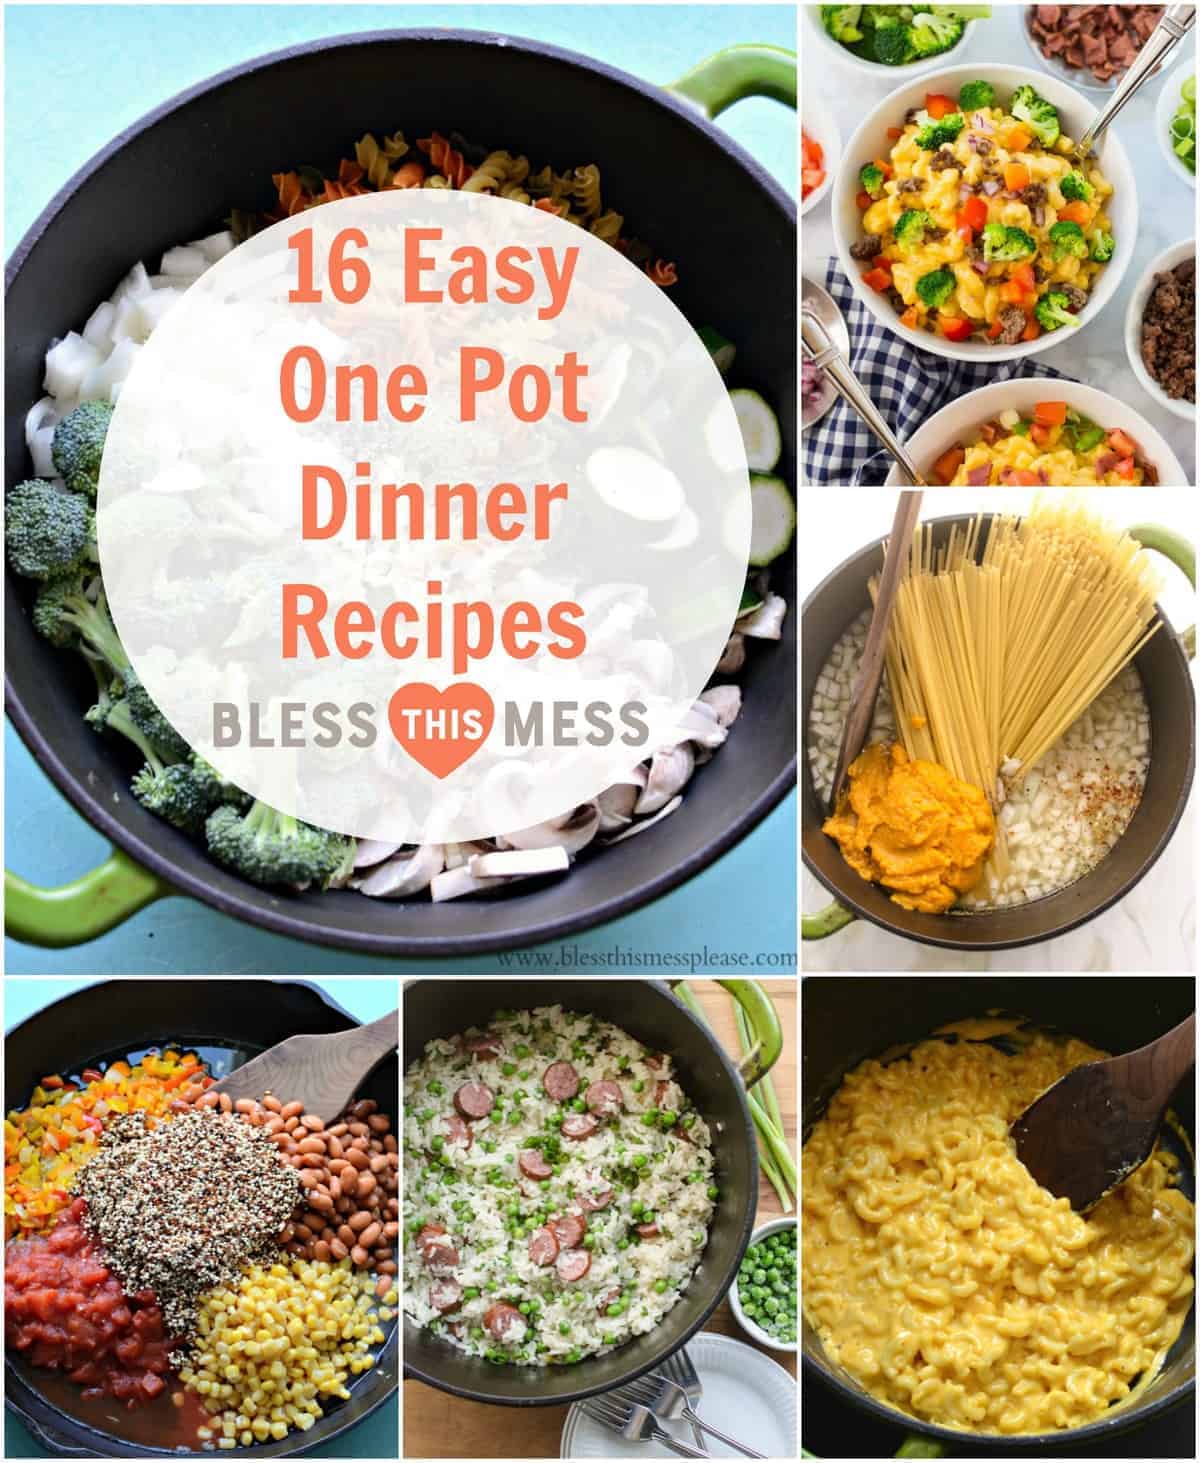 16 easy-peasy one pot dinner recipes to help you get through a busy season. There is something here for everyone! 